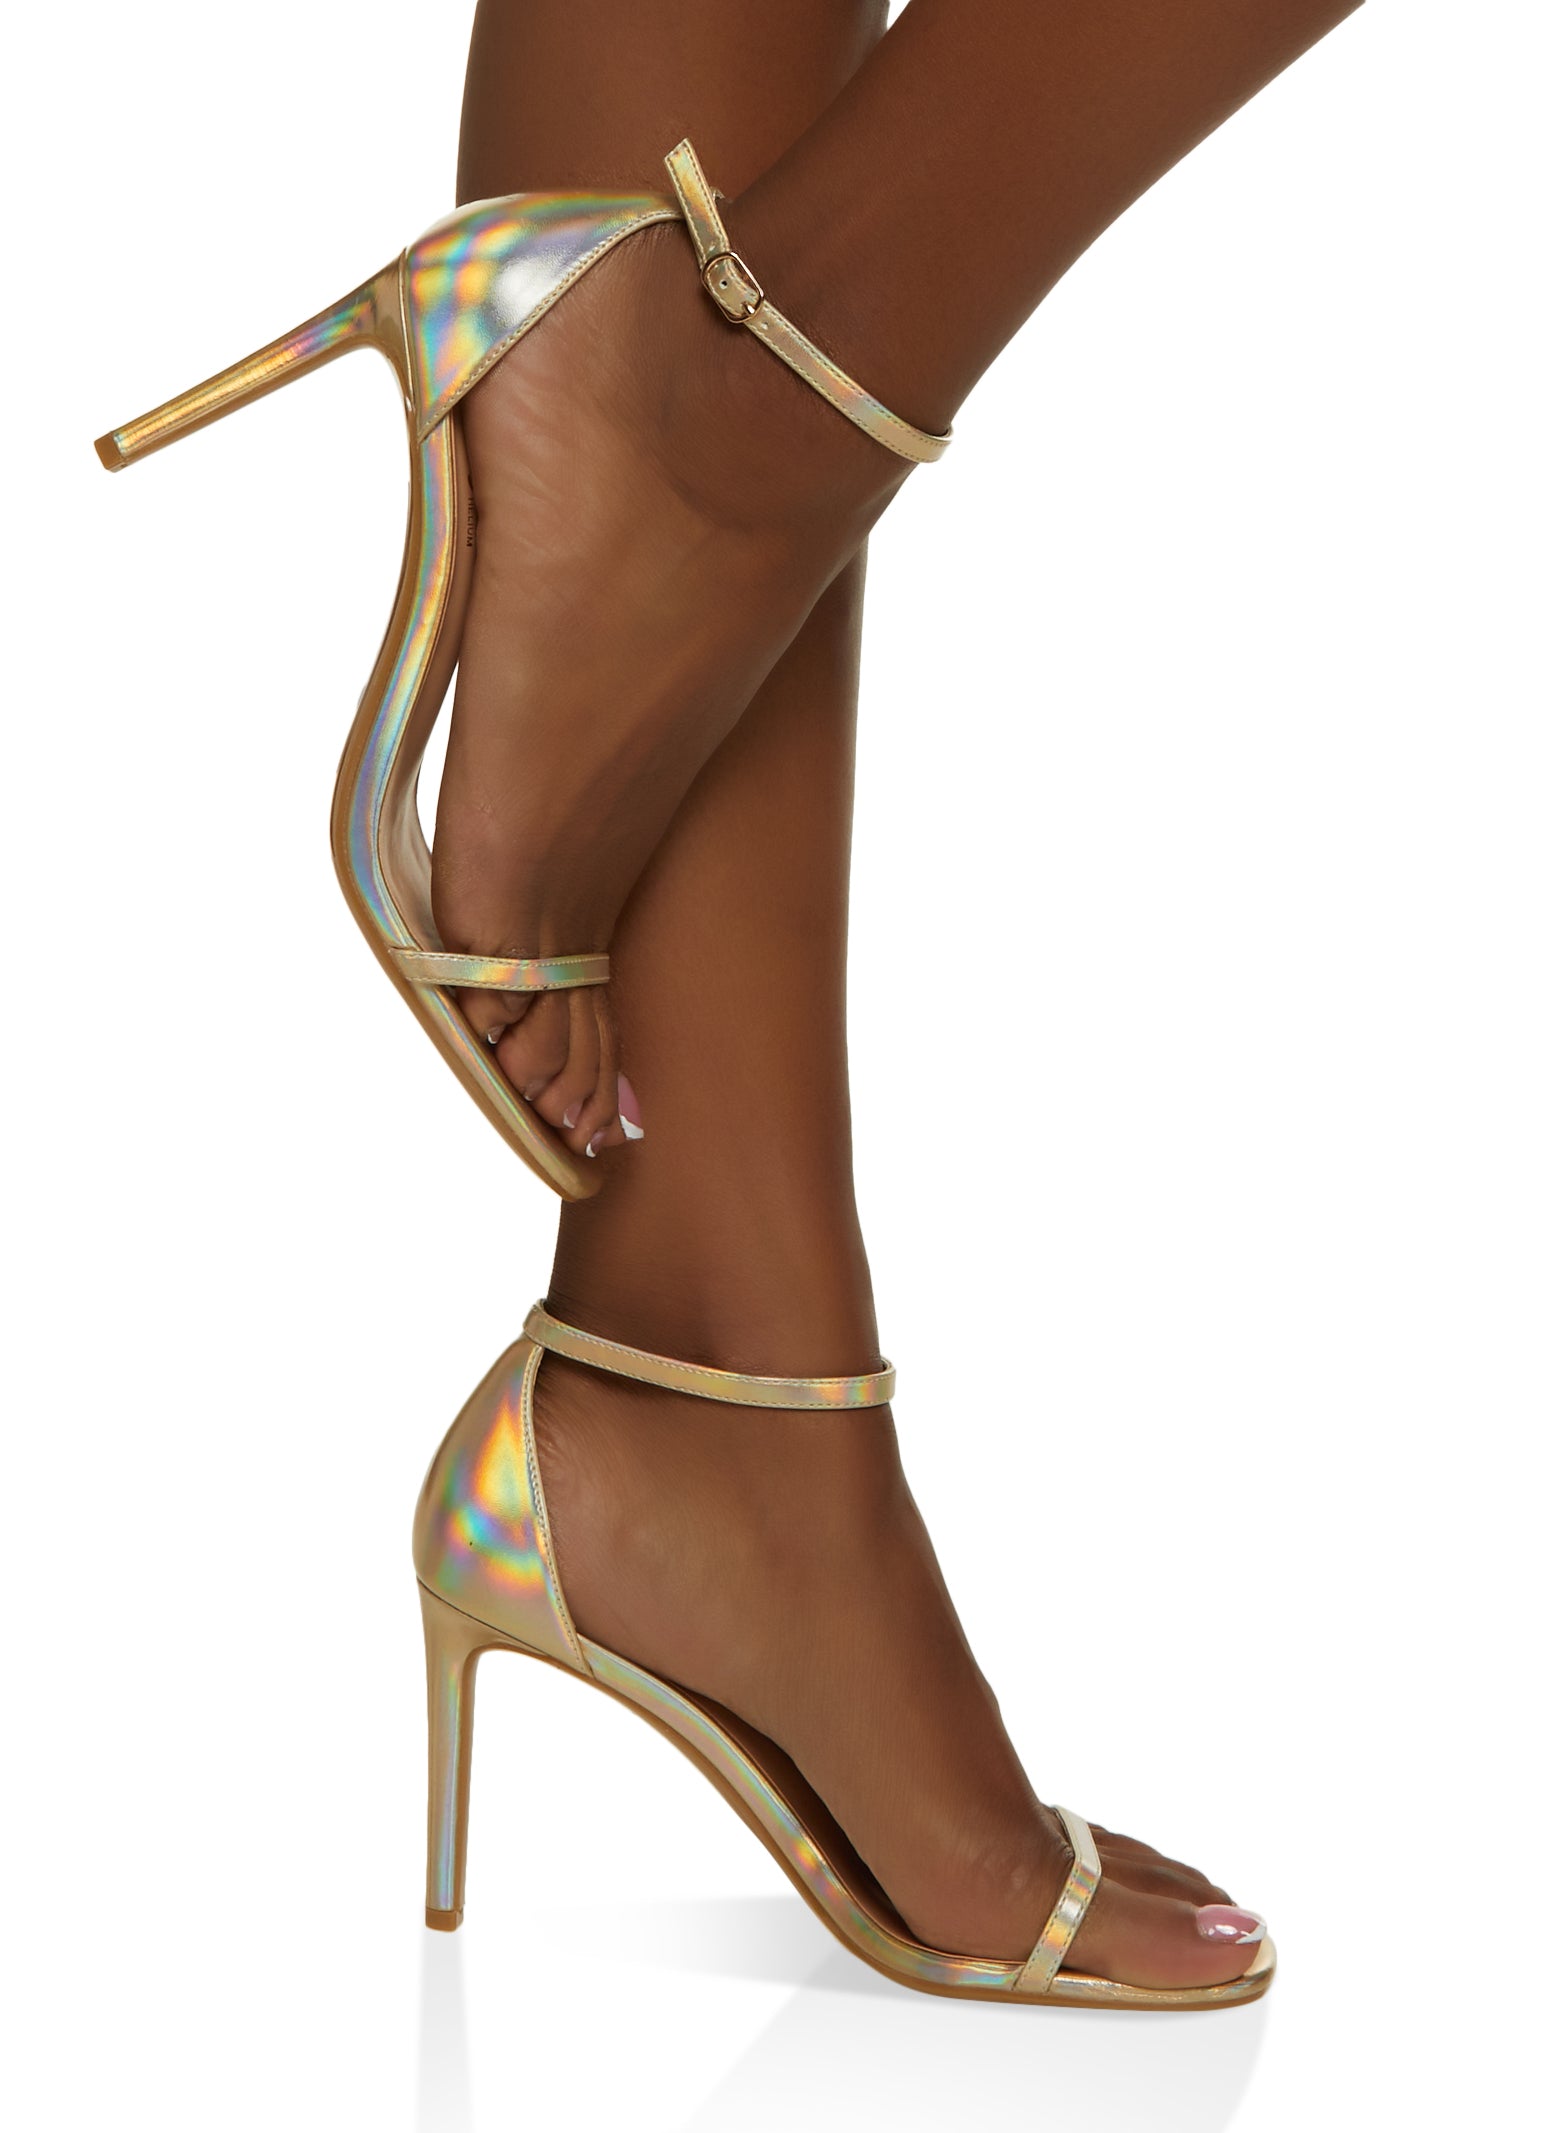 Cute Gold Shoes - High Heel Sandals - Ankle Strap Heels - Lulus